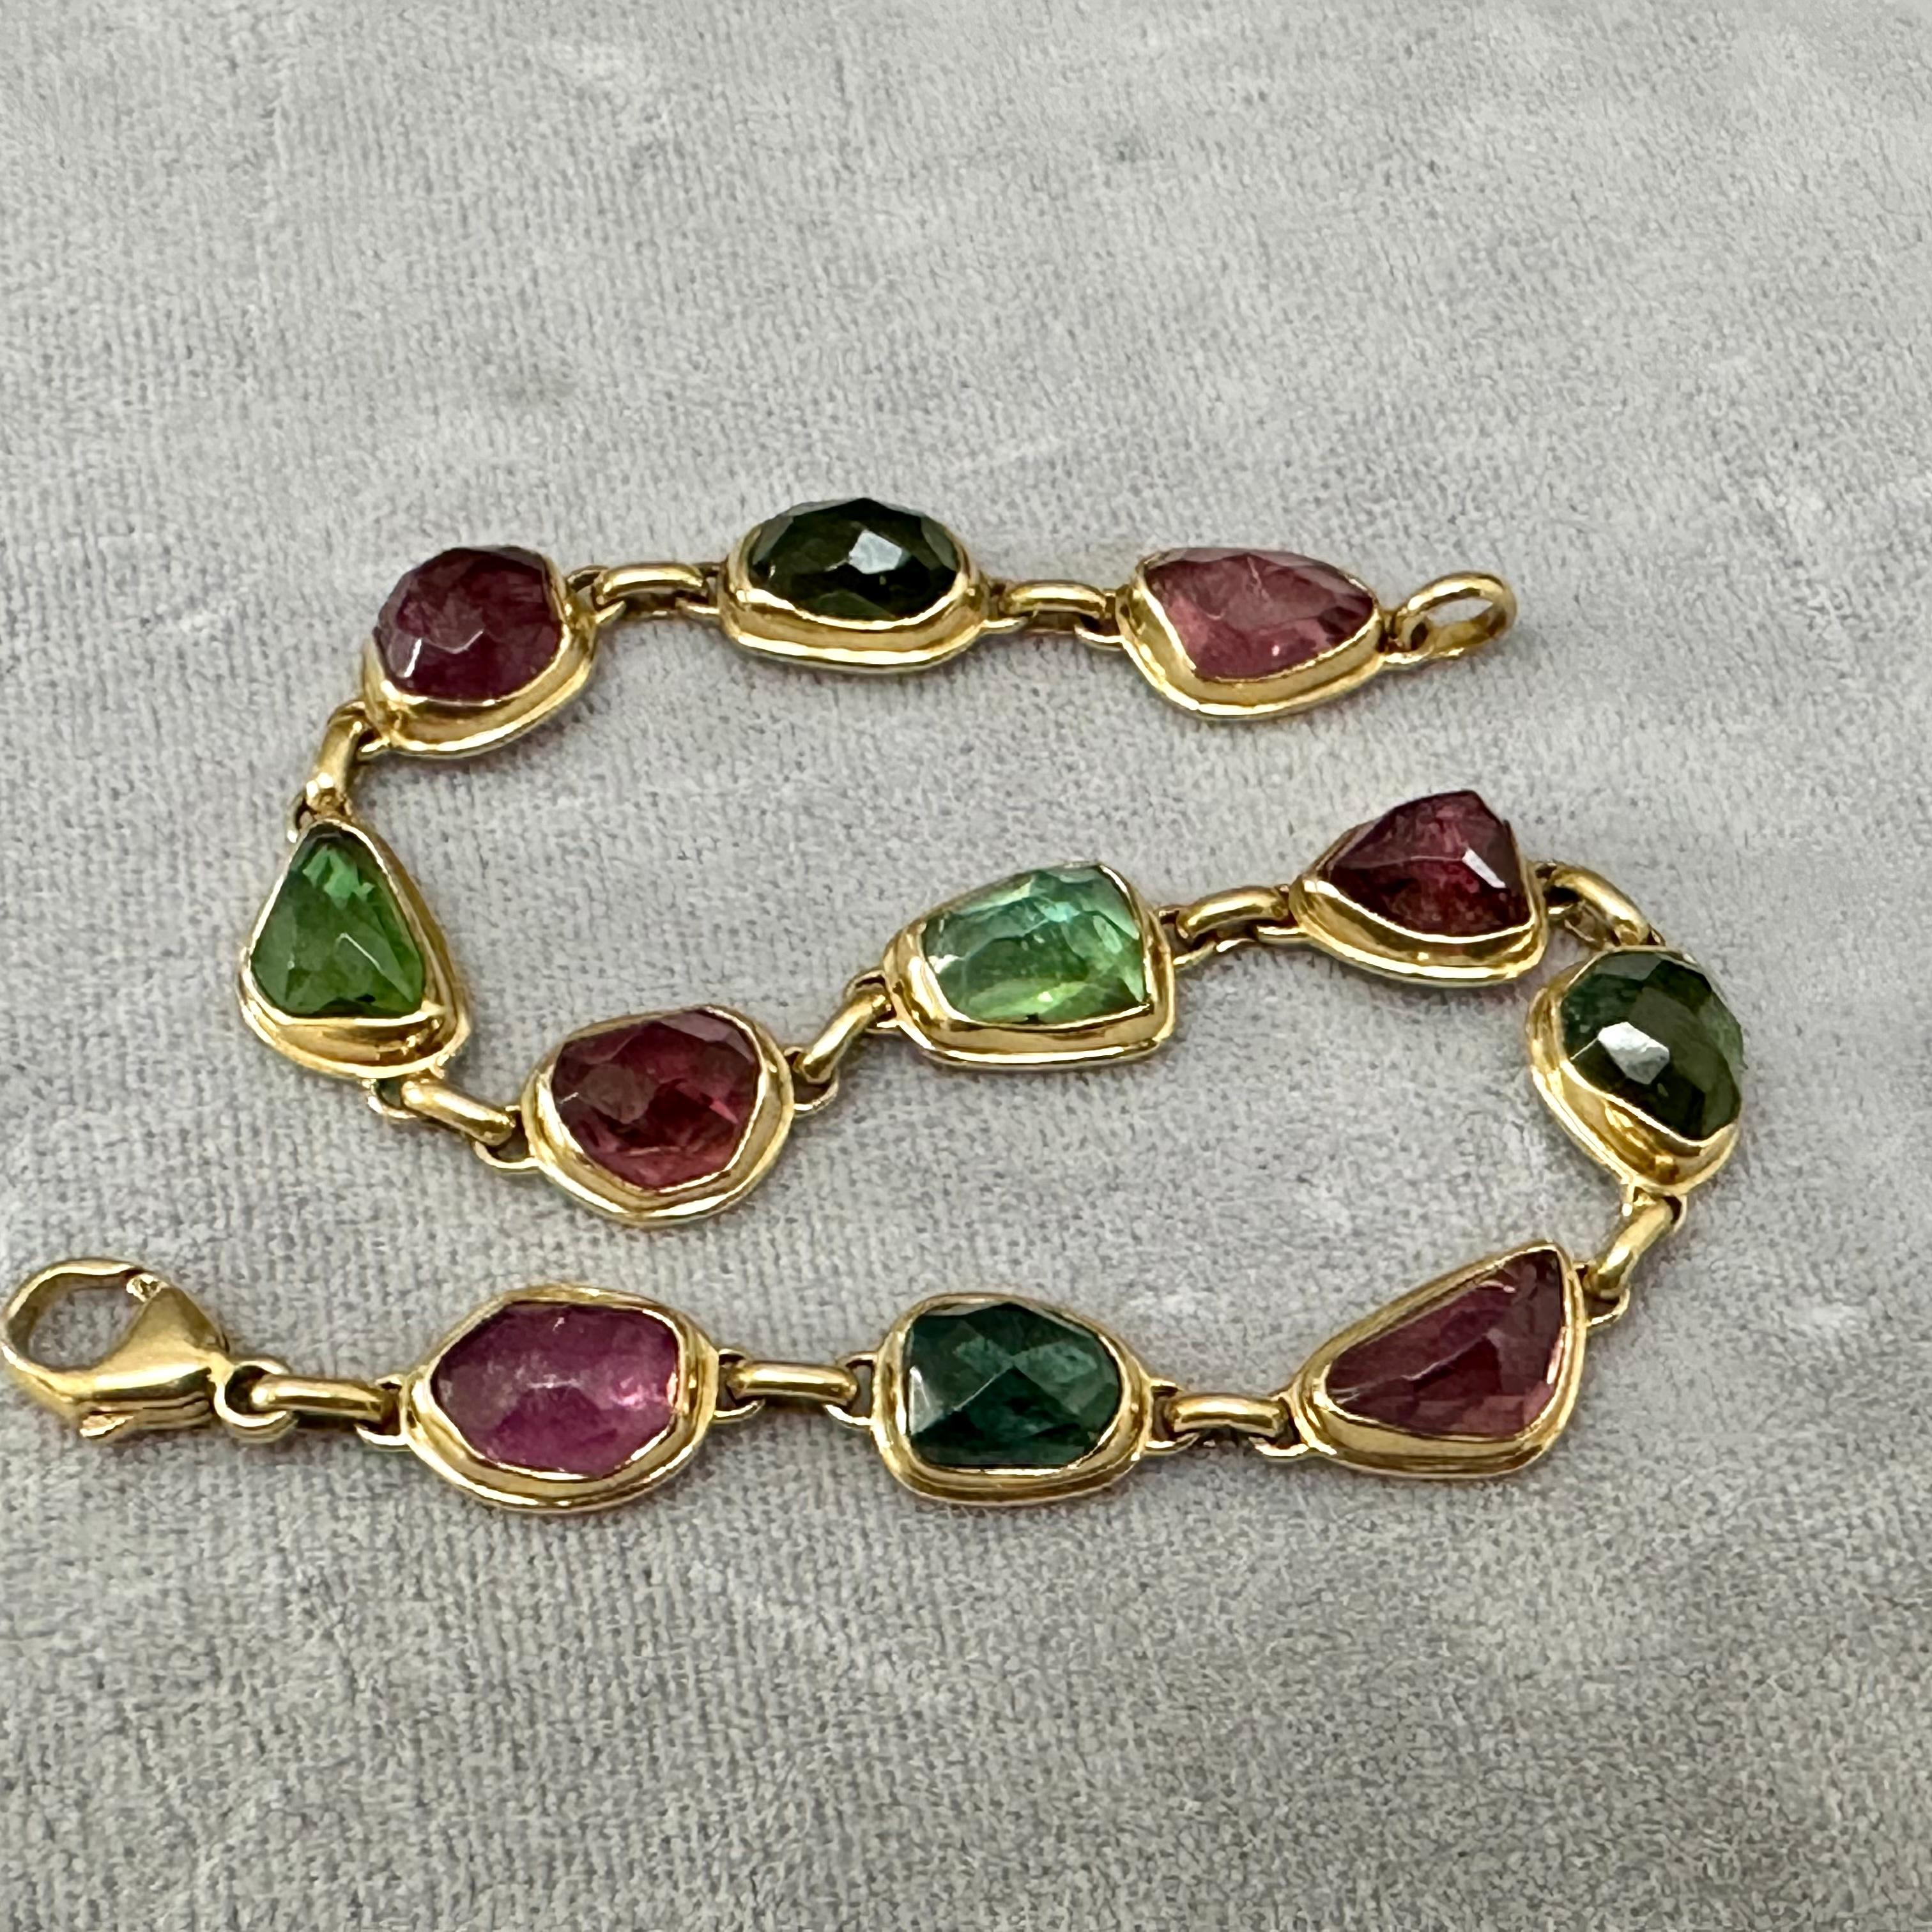 Eleven irregular shaped rose-cut tourmalines approximately 8 x 10 mm in size sparkle in multiple shades of pink and green in this attractive organic design. Each stone attracts the eye with the contrast to the surrounding matte-finish 18K gold